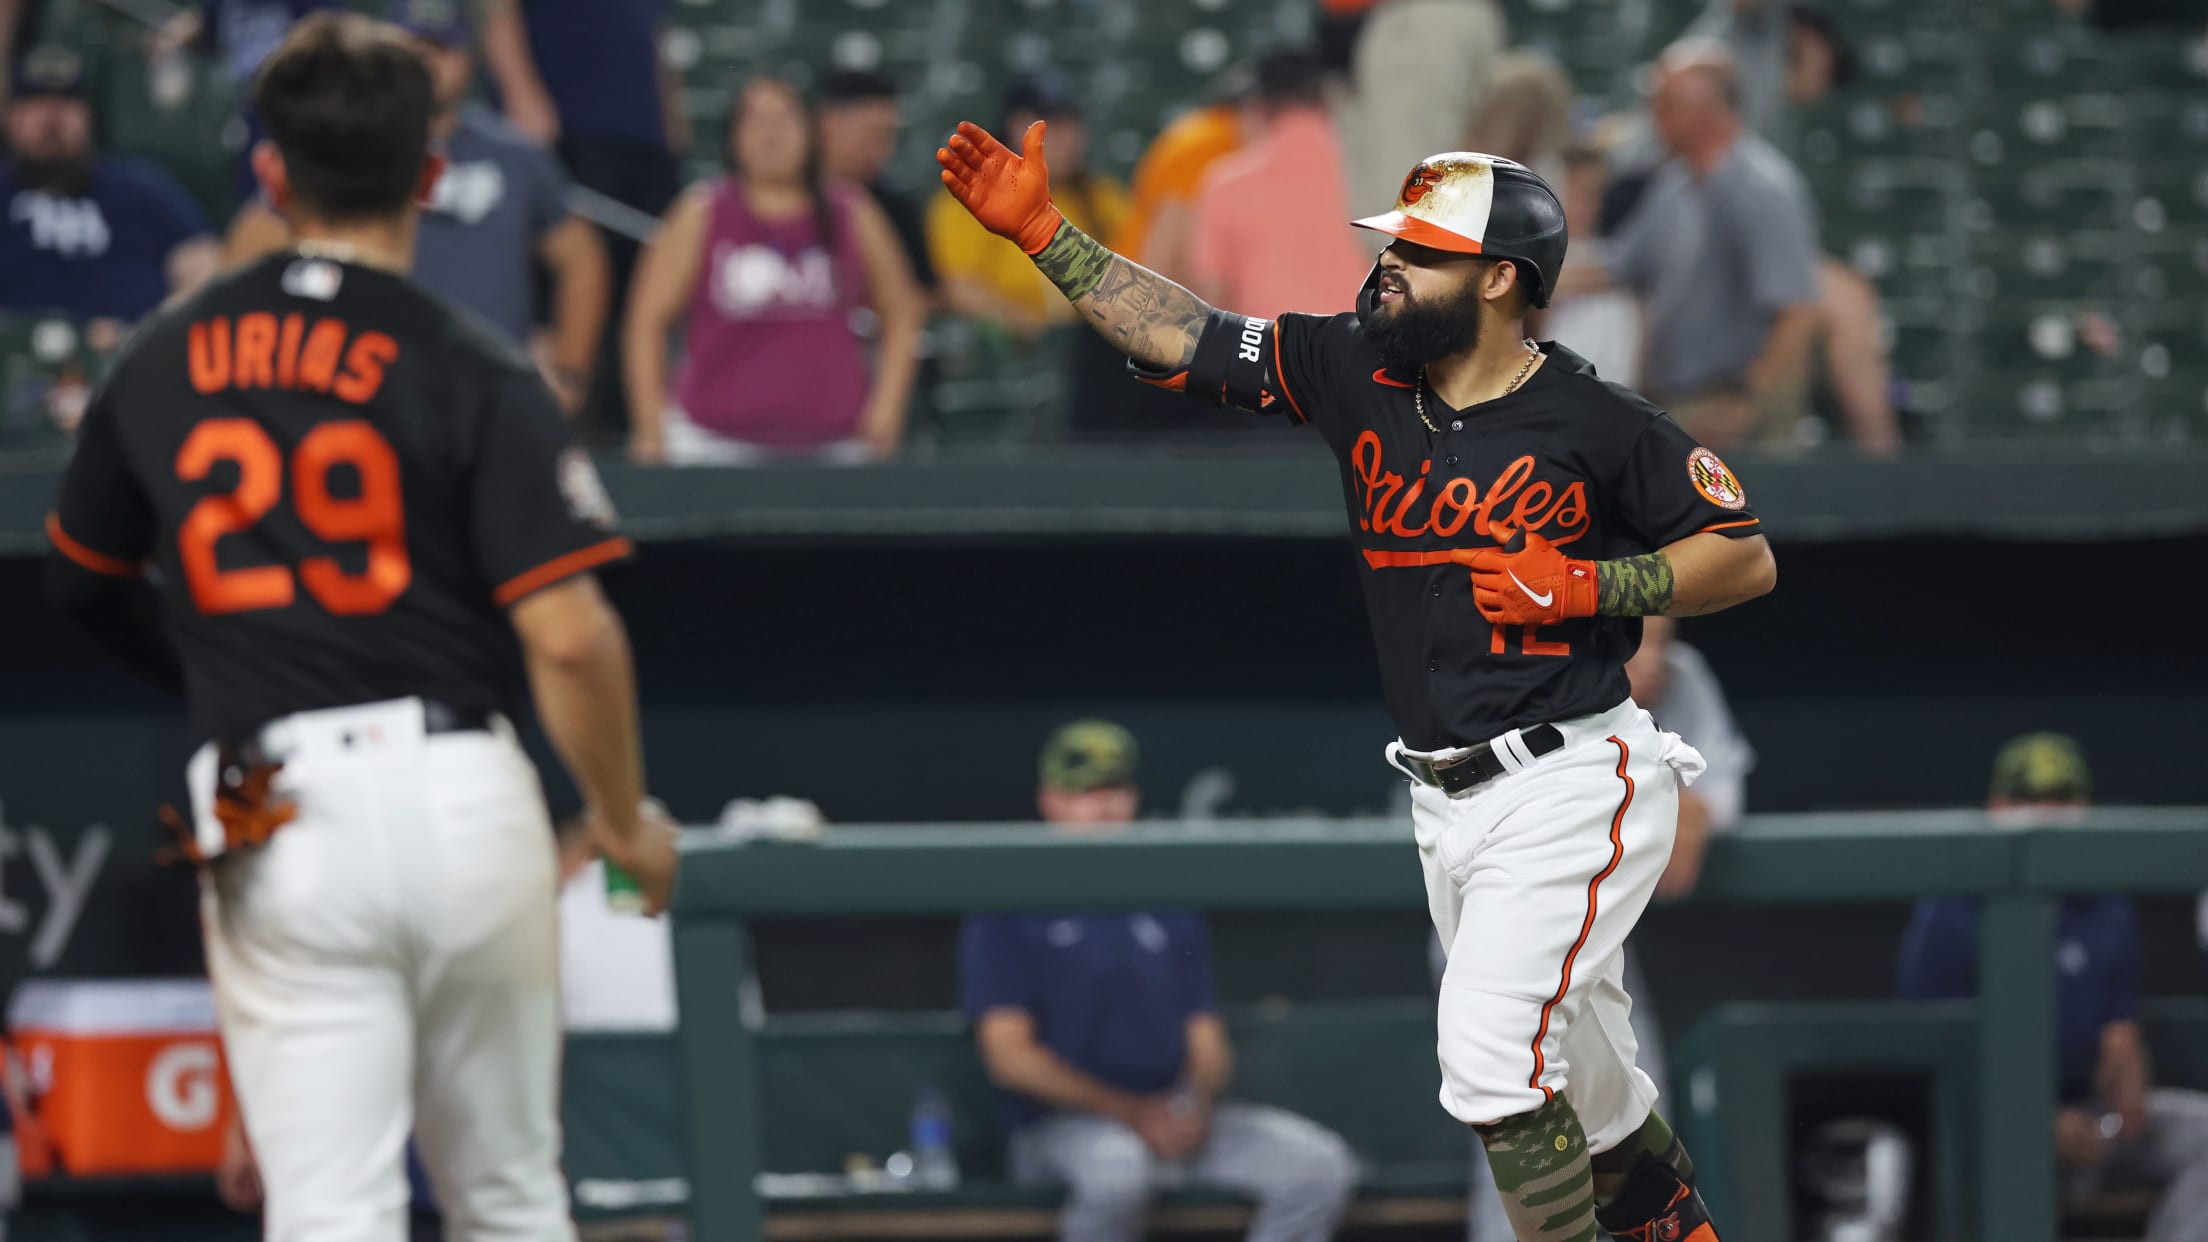 Orioles may need to dodge raindrops to stay undefeated in Boston